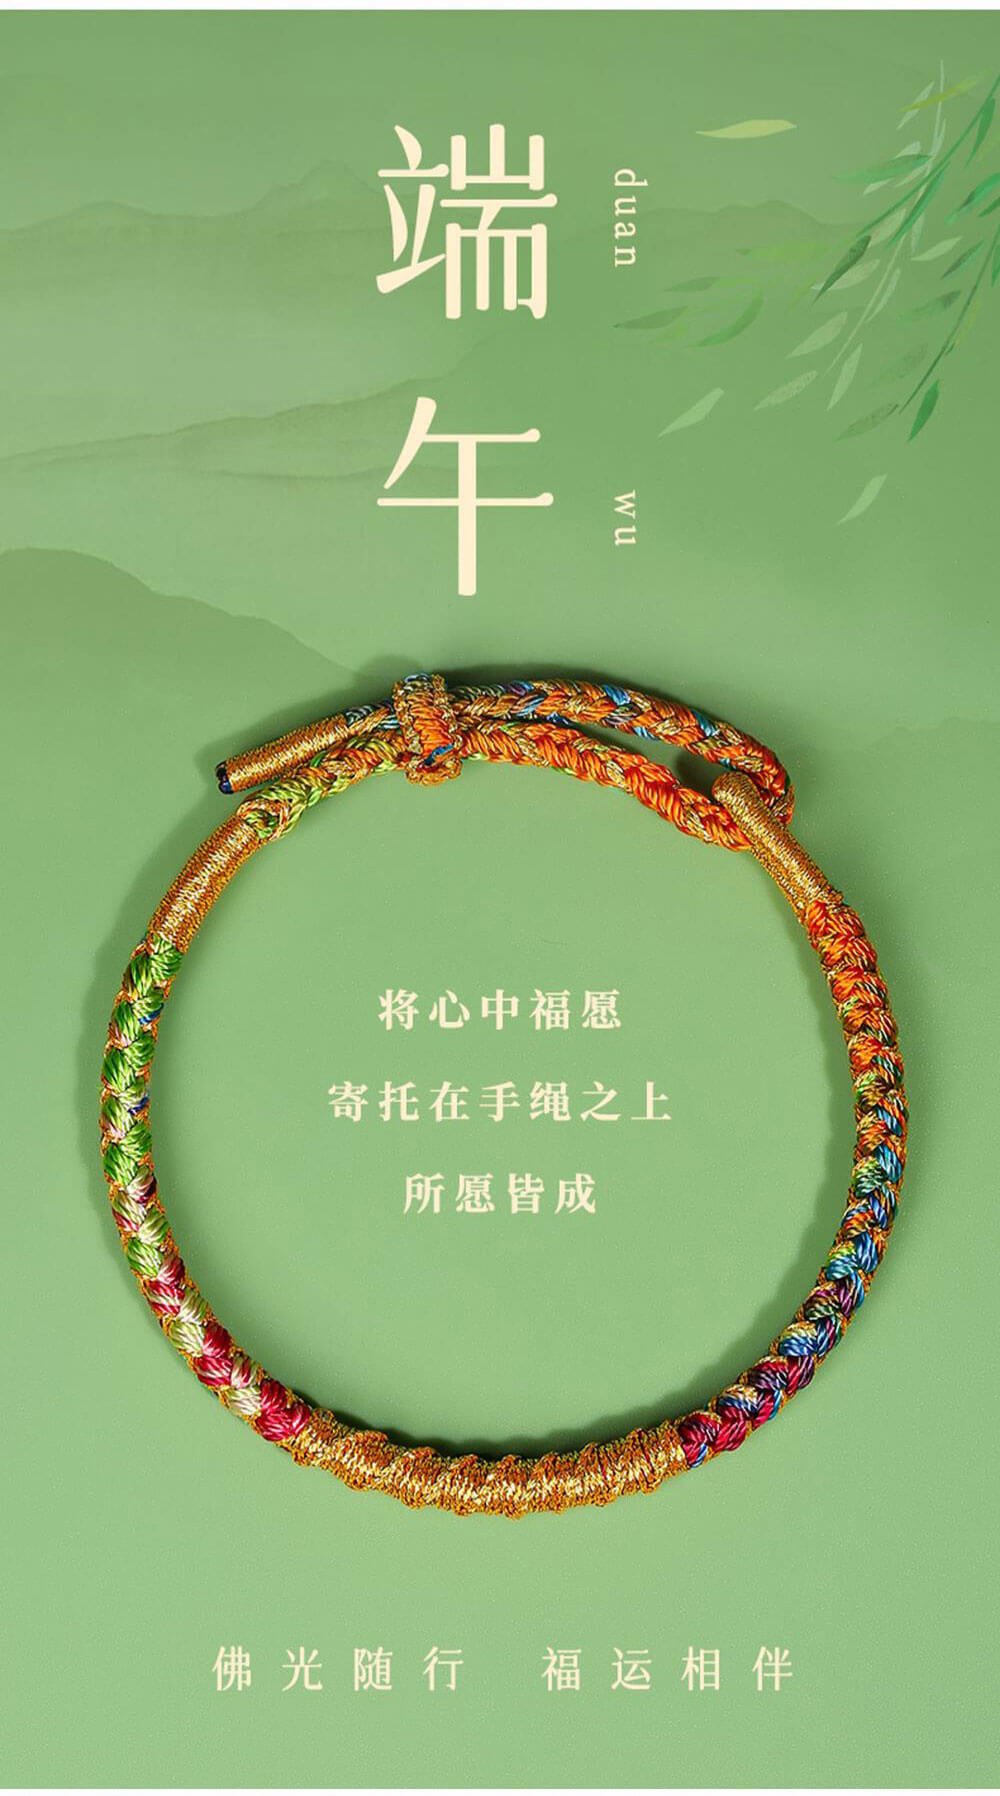 《Dragon Scale Rainbow Rope》 Handcrafted Dragon Boat Festival Woven Bracelet